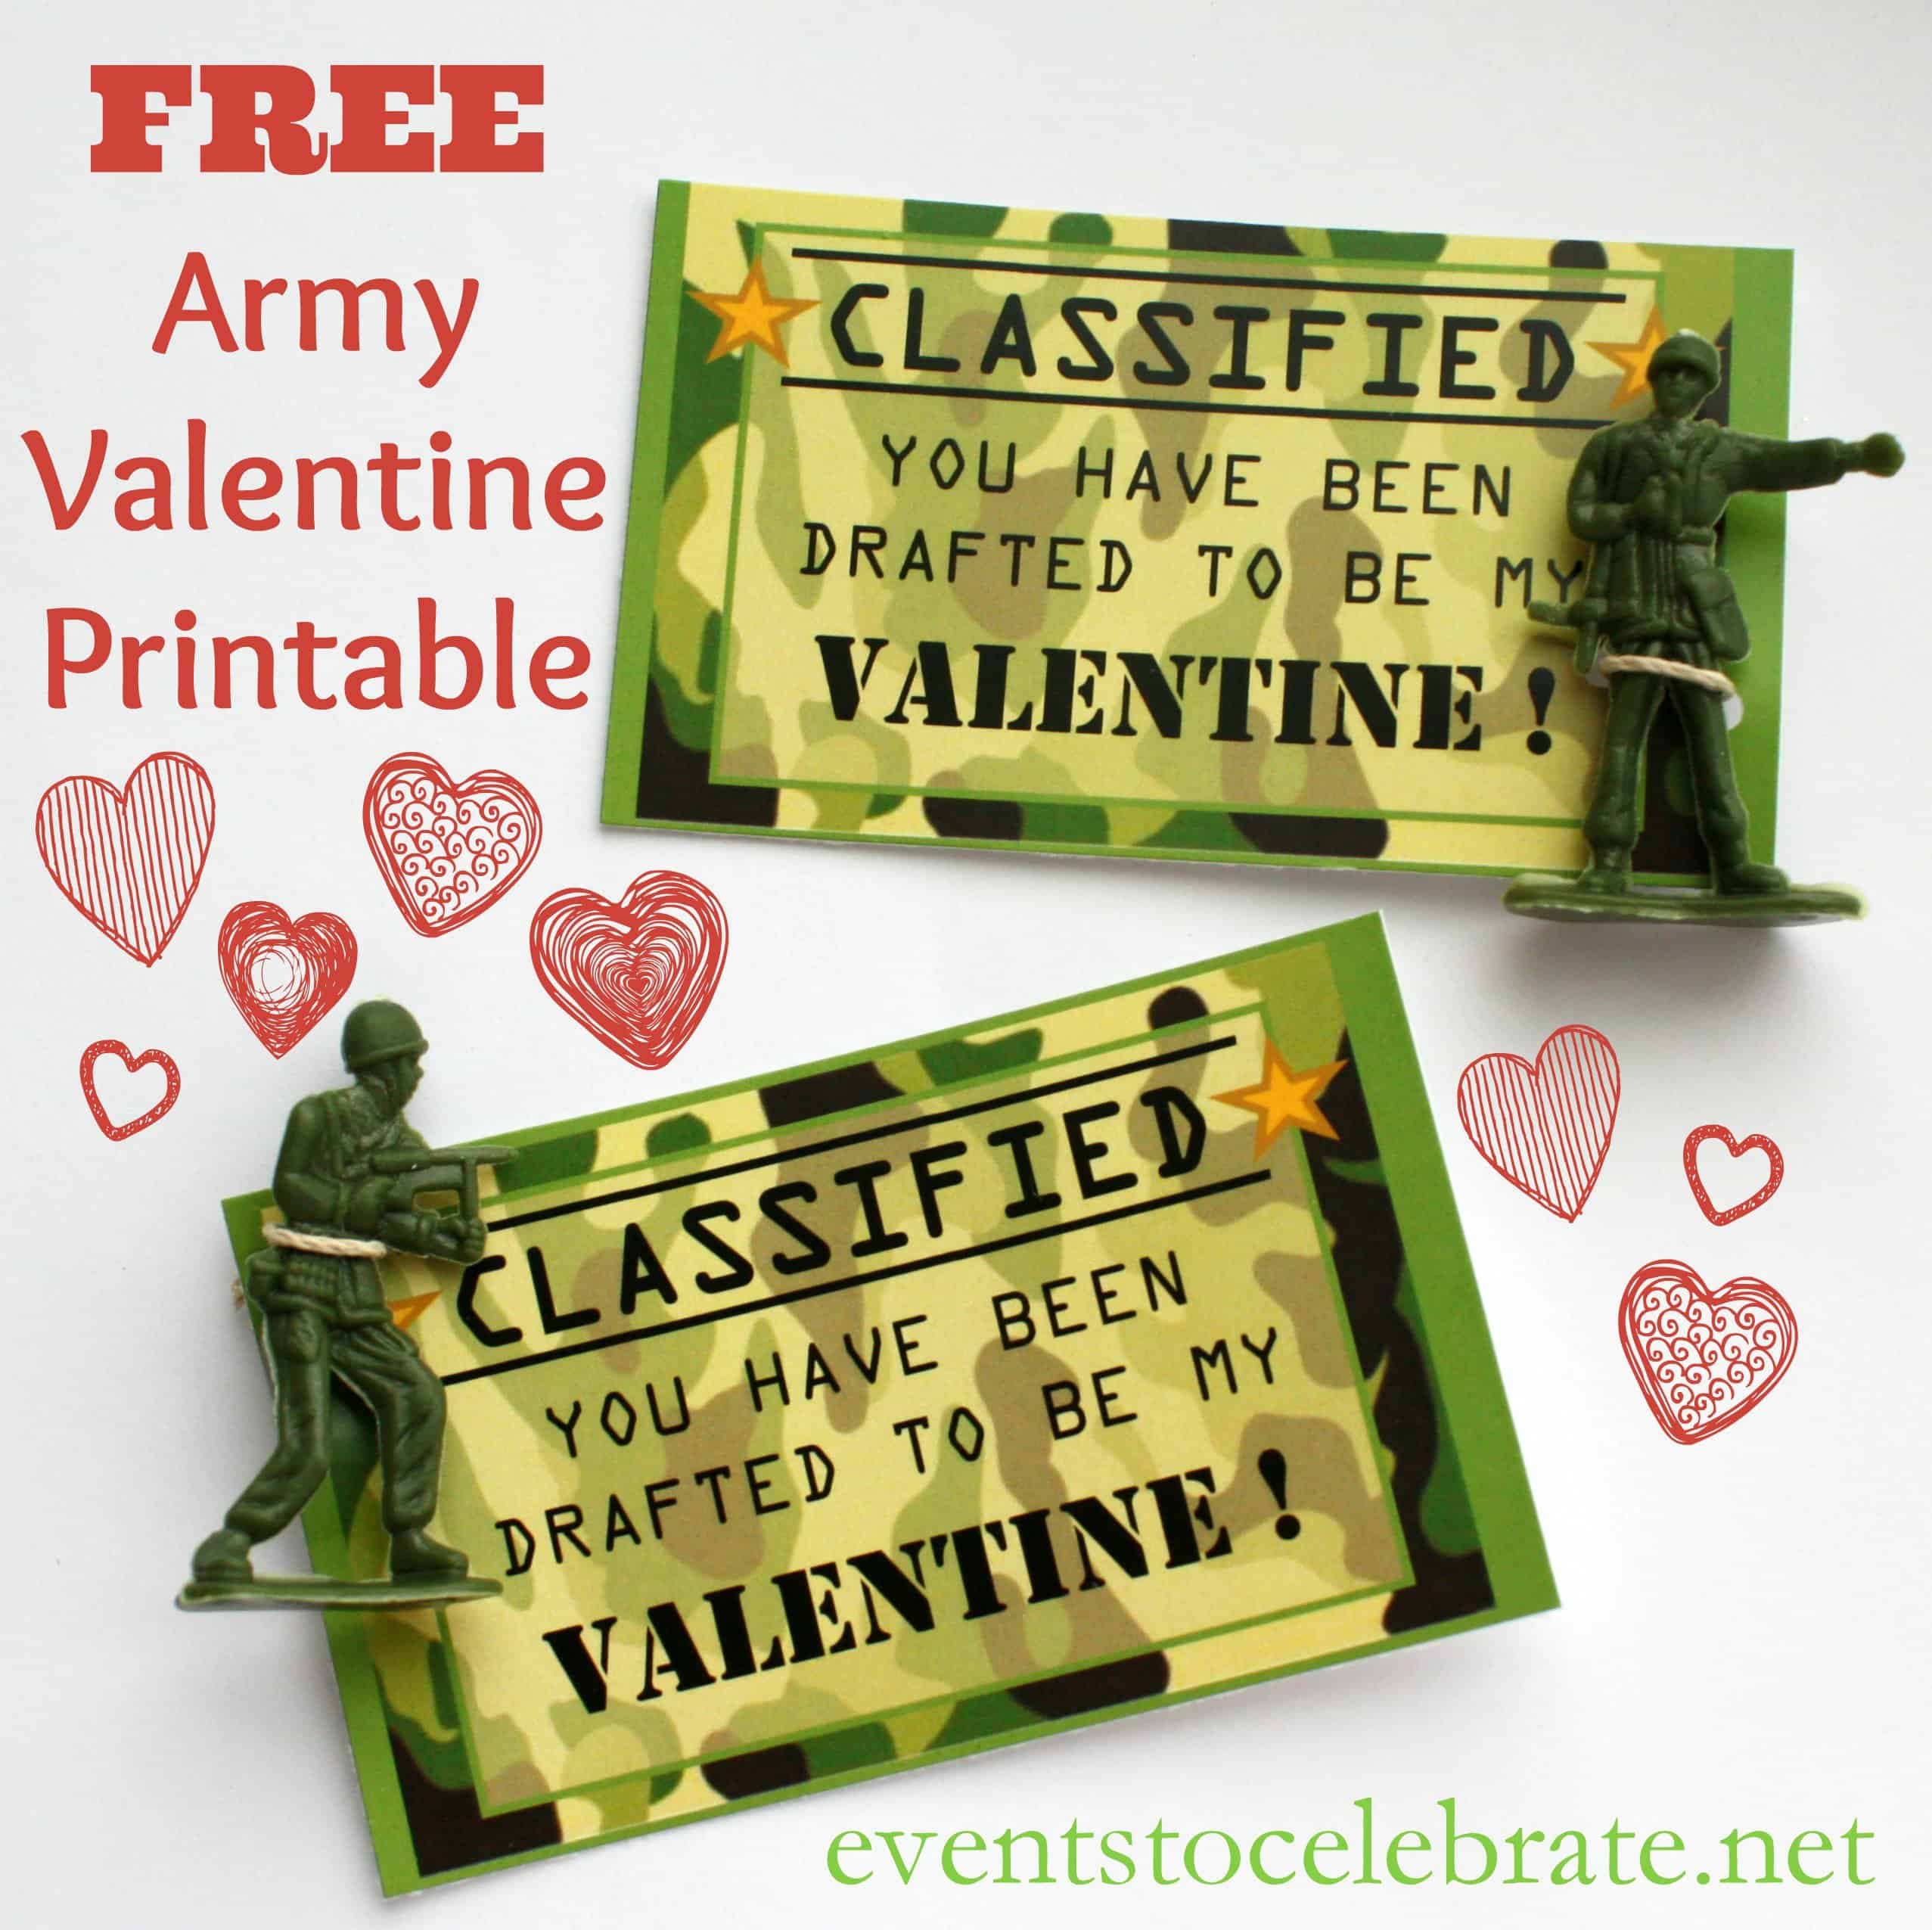 Free Valentine s Day Printable Army Valentine Party Ideas For Real People